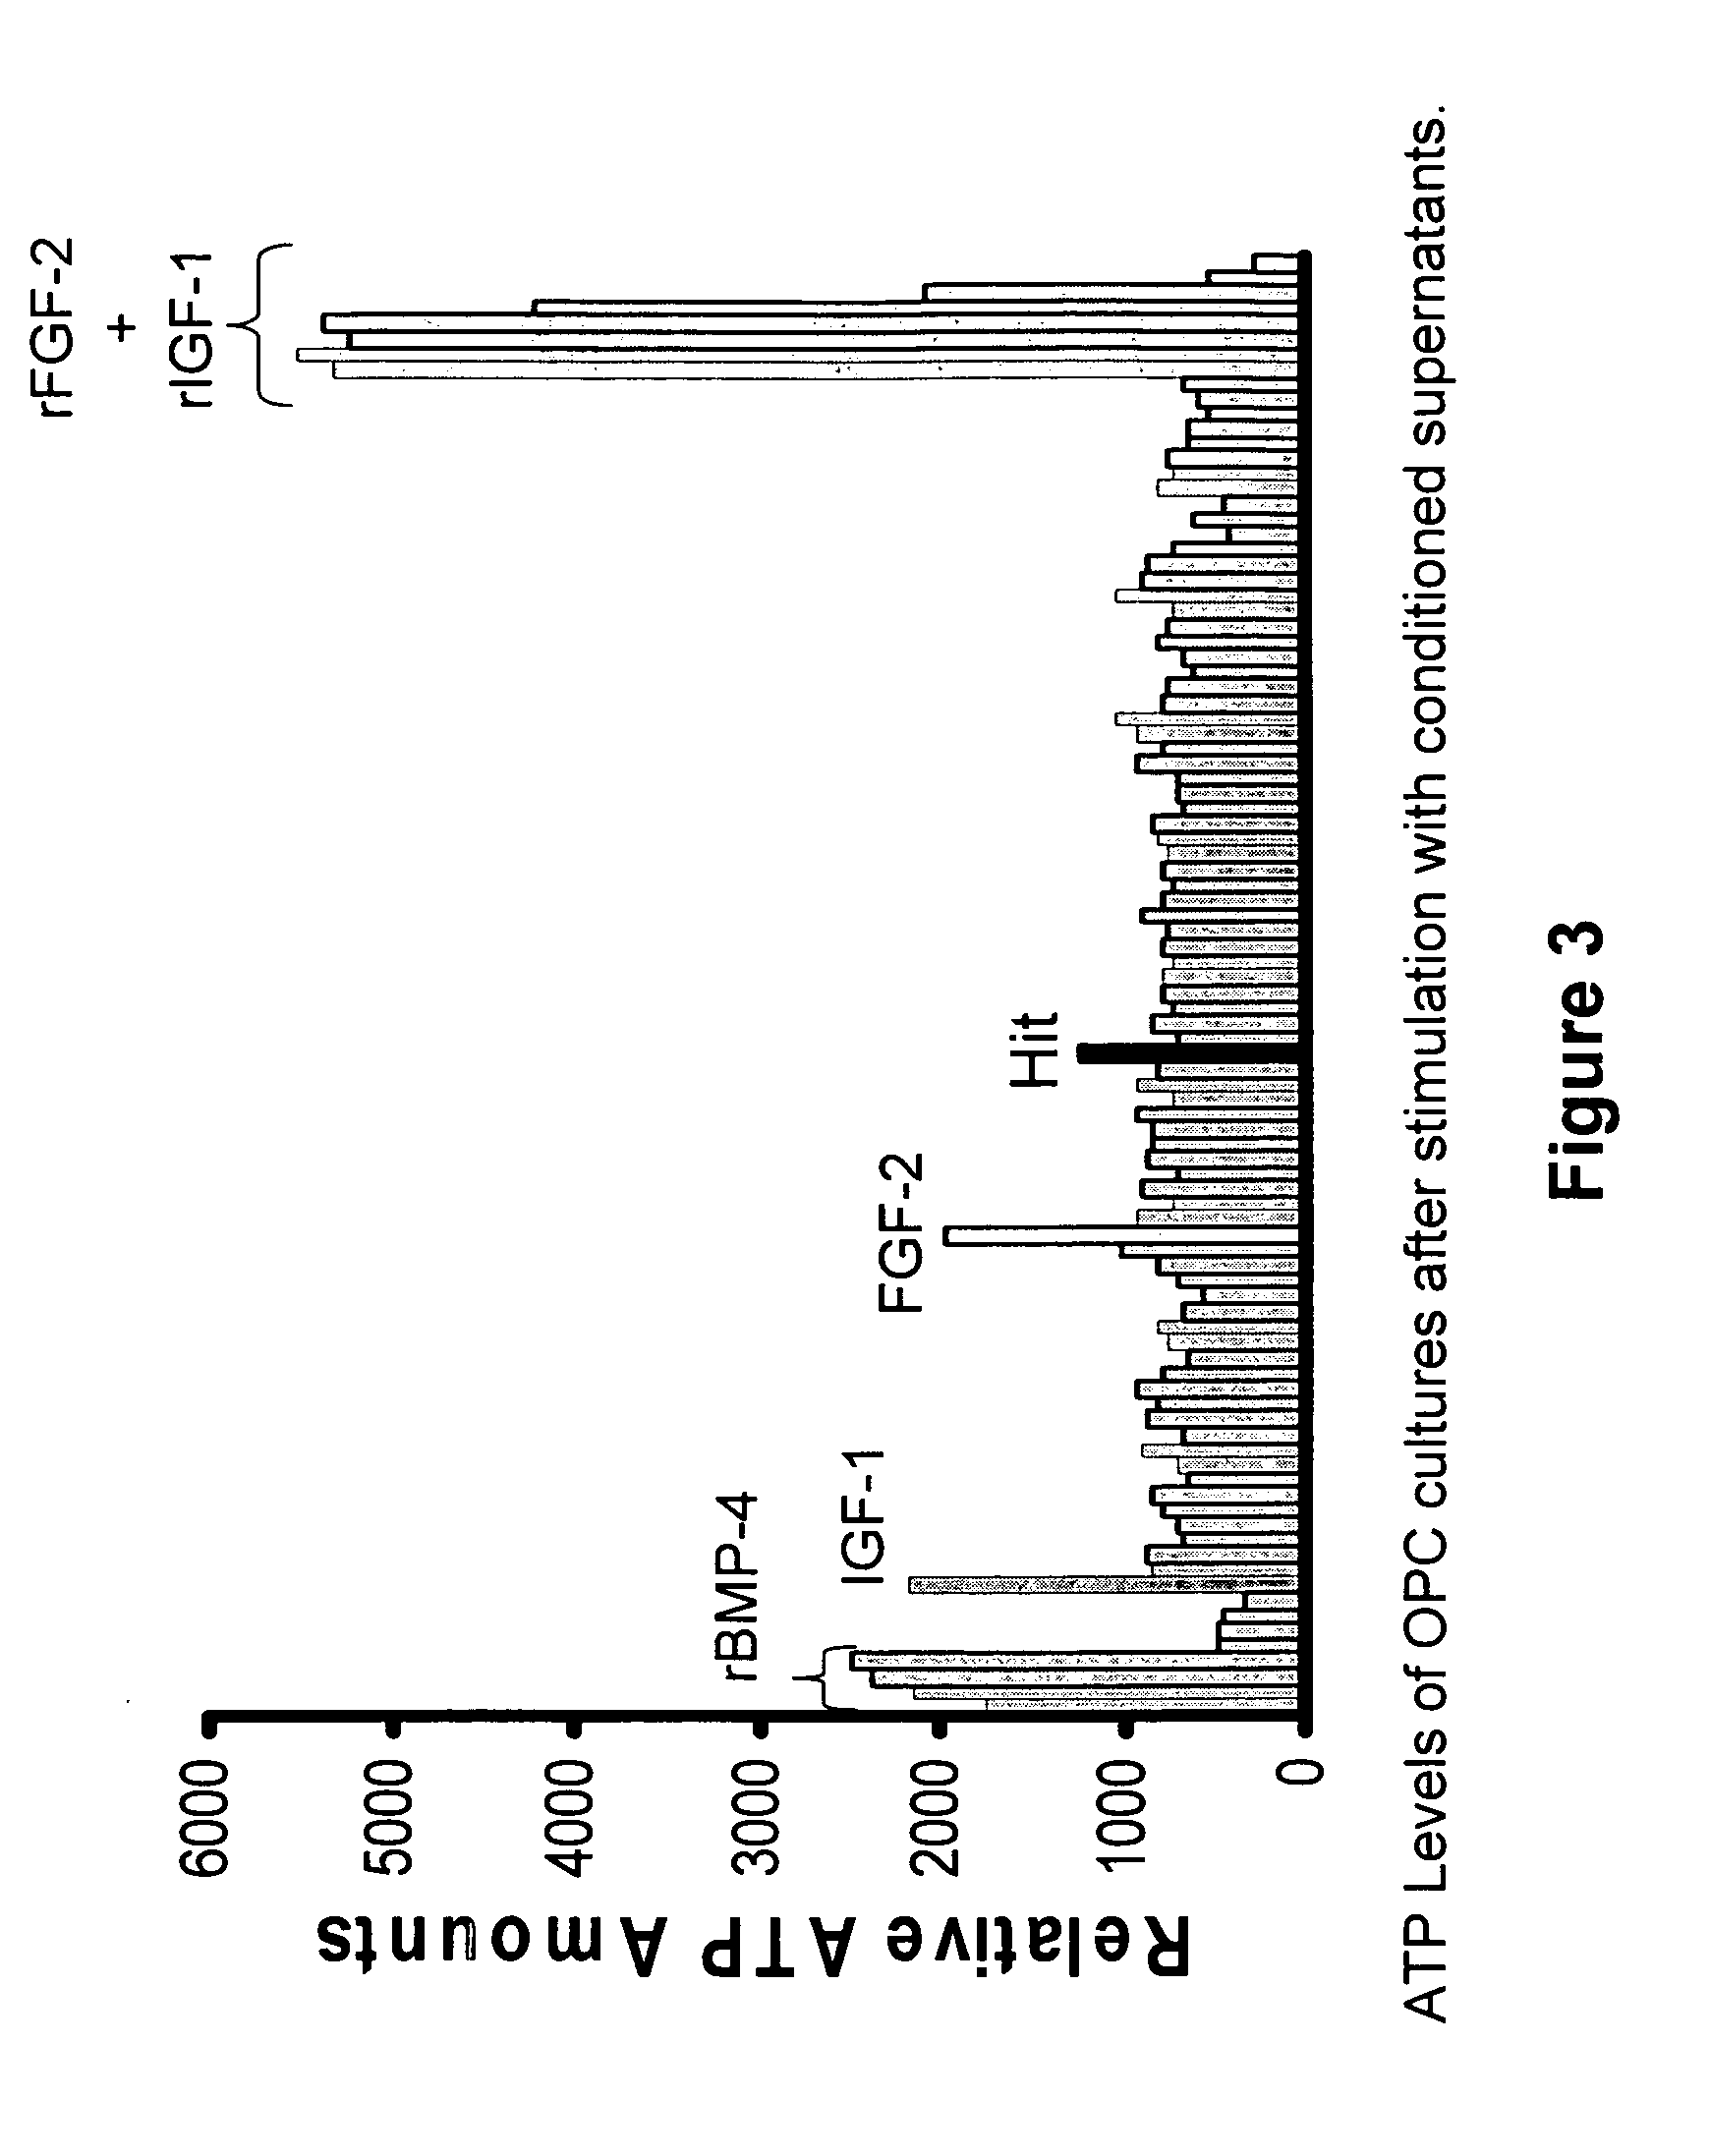 Compositions and Methods for Treating Diseases, Disorders, or Conditions Characterized by Myelin Degeneration, Myelin Deficiency or Loss